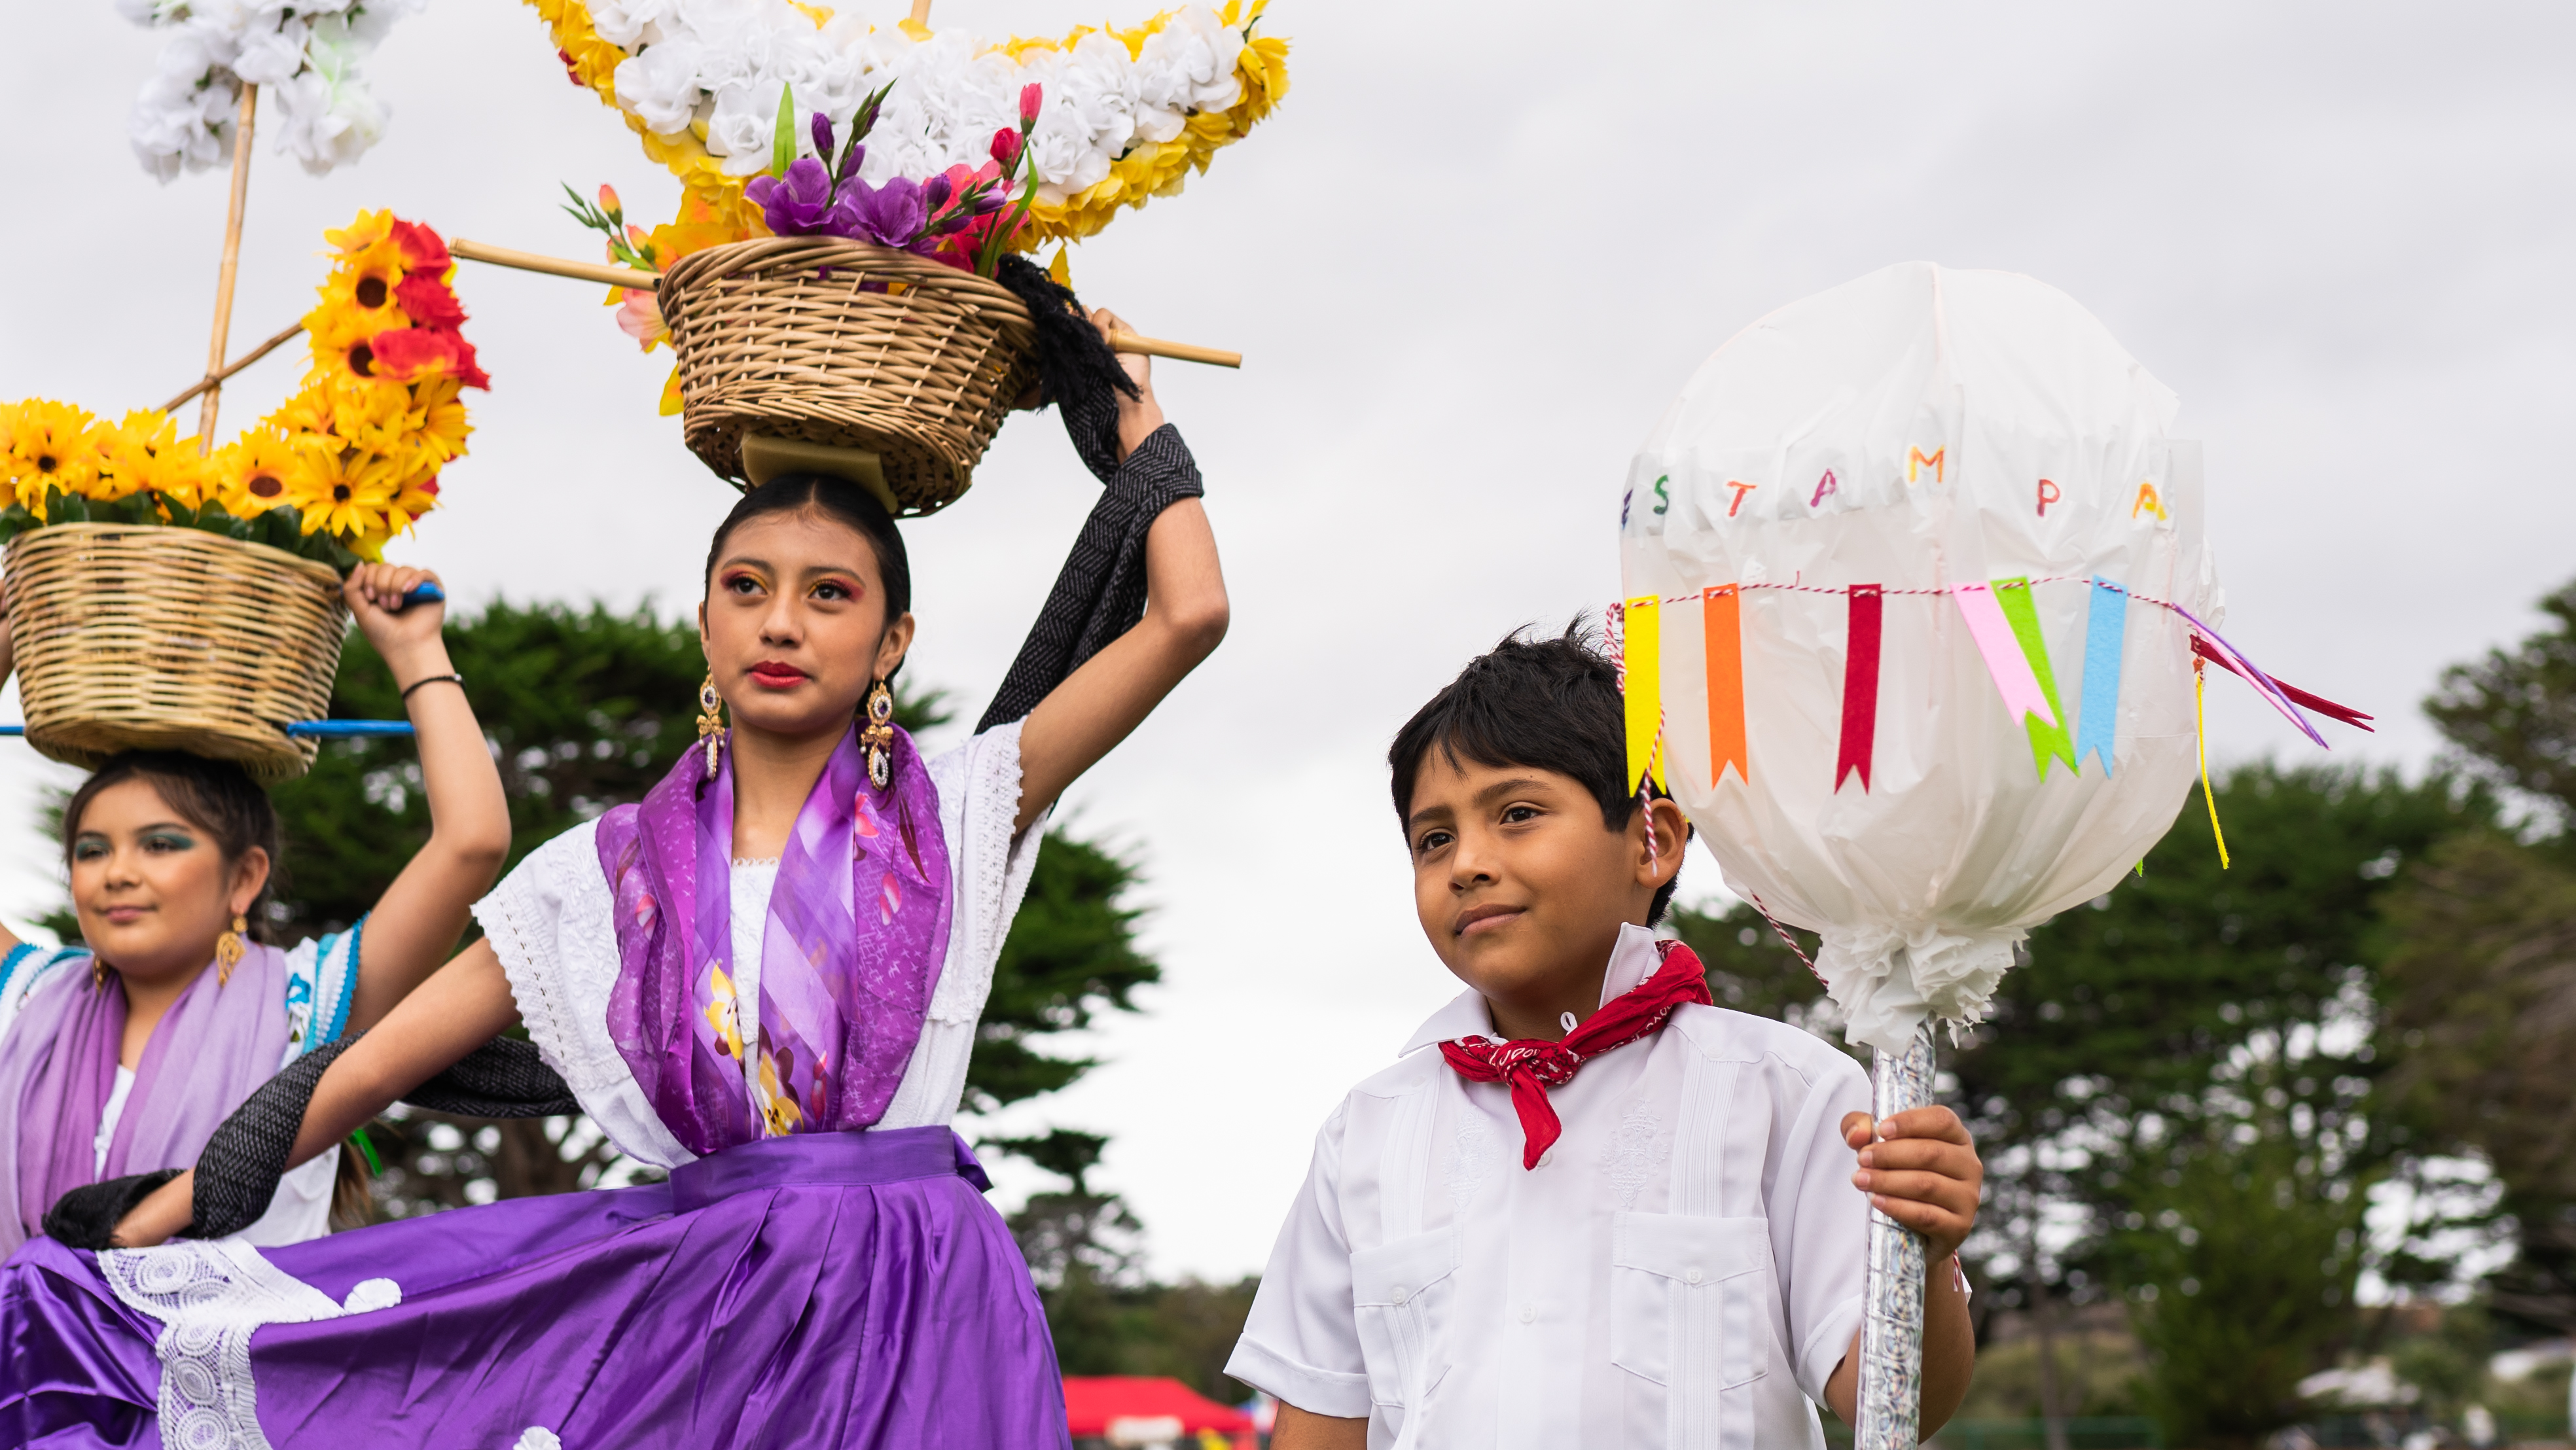 Capturing the Spirit and Vibrancy of Oaxaca by the Sea - NYX Awards Winner 